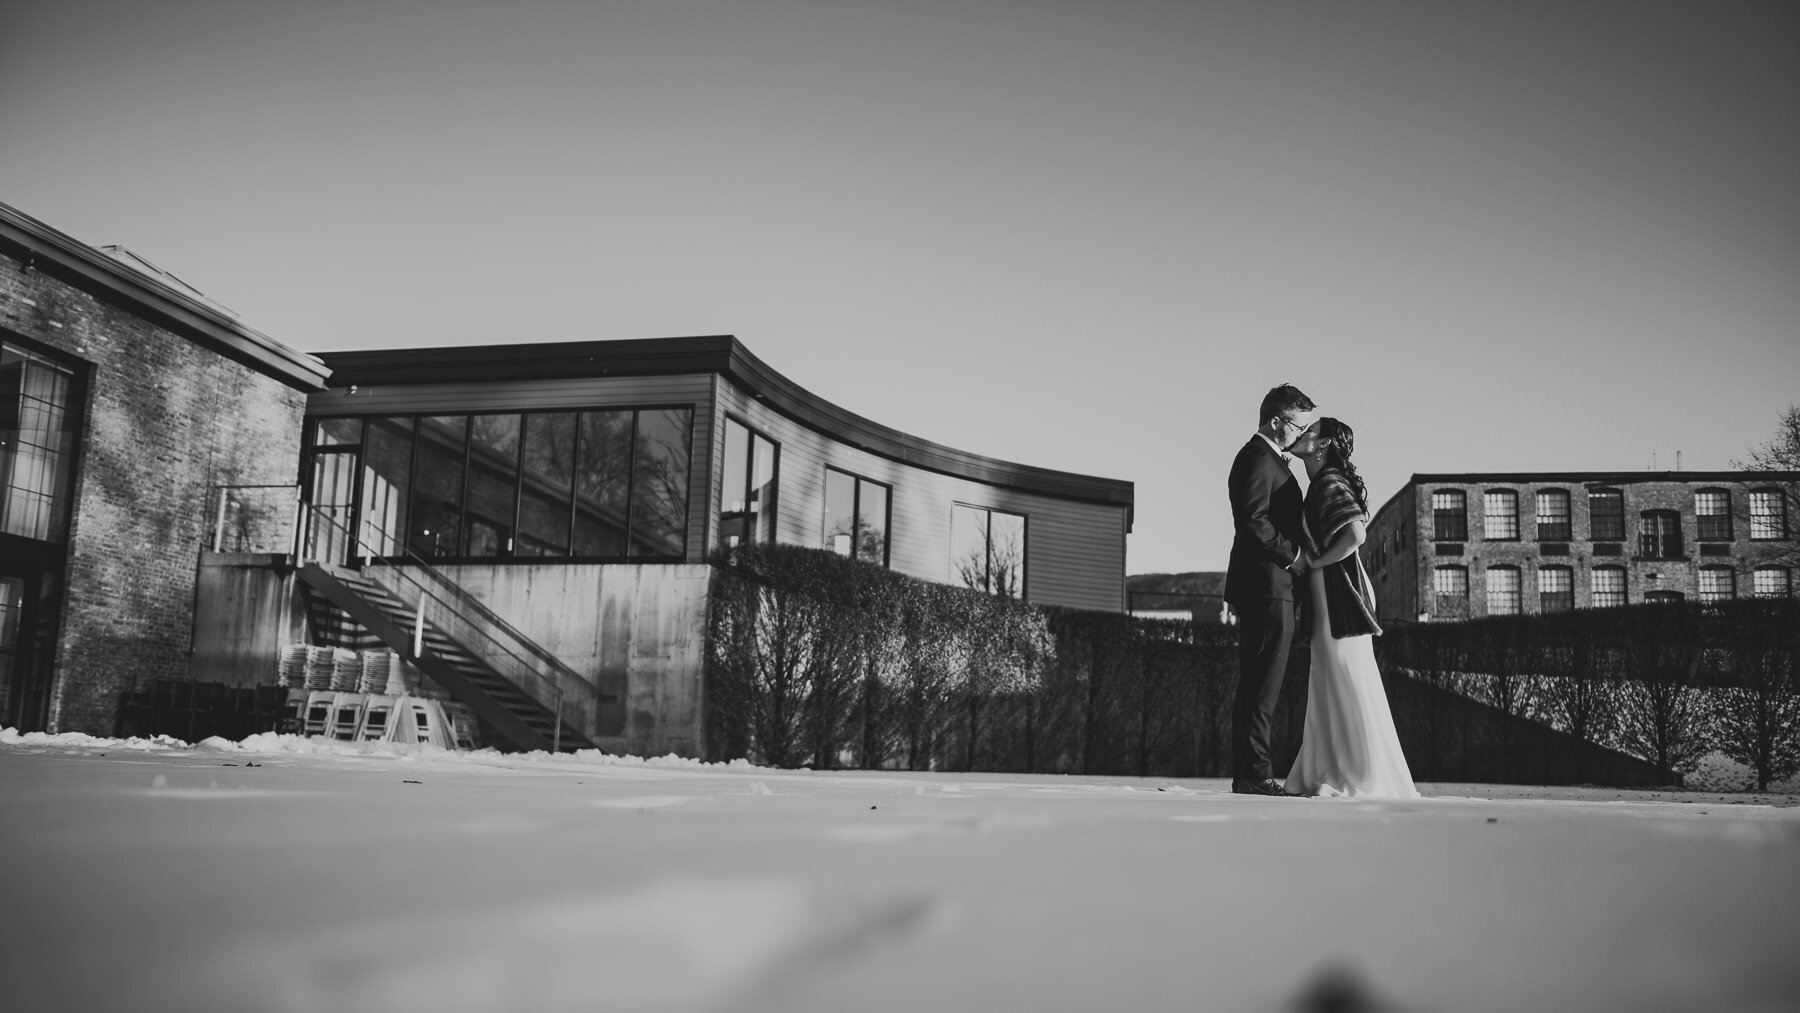 Wedding portrait taken of the bride and groom at the Roundhouse in Beacon, New York up in the Hudson River Valley